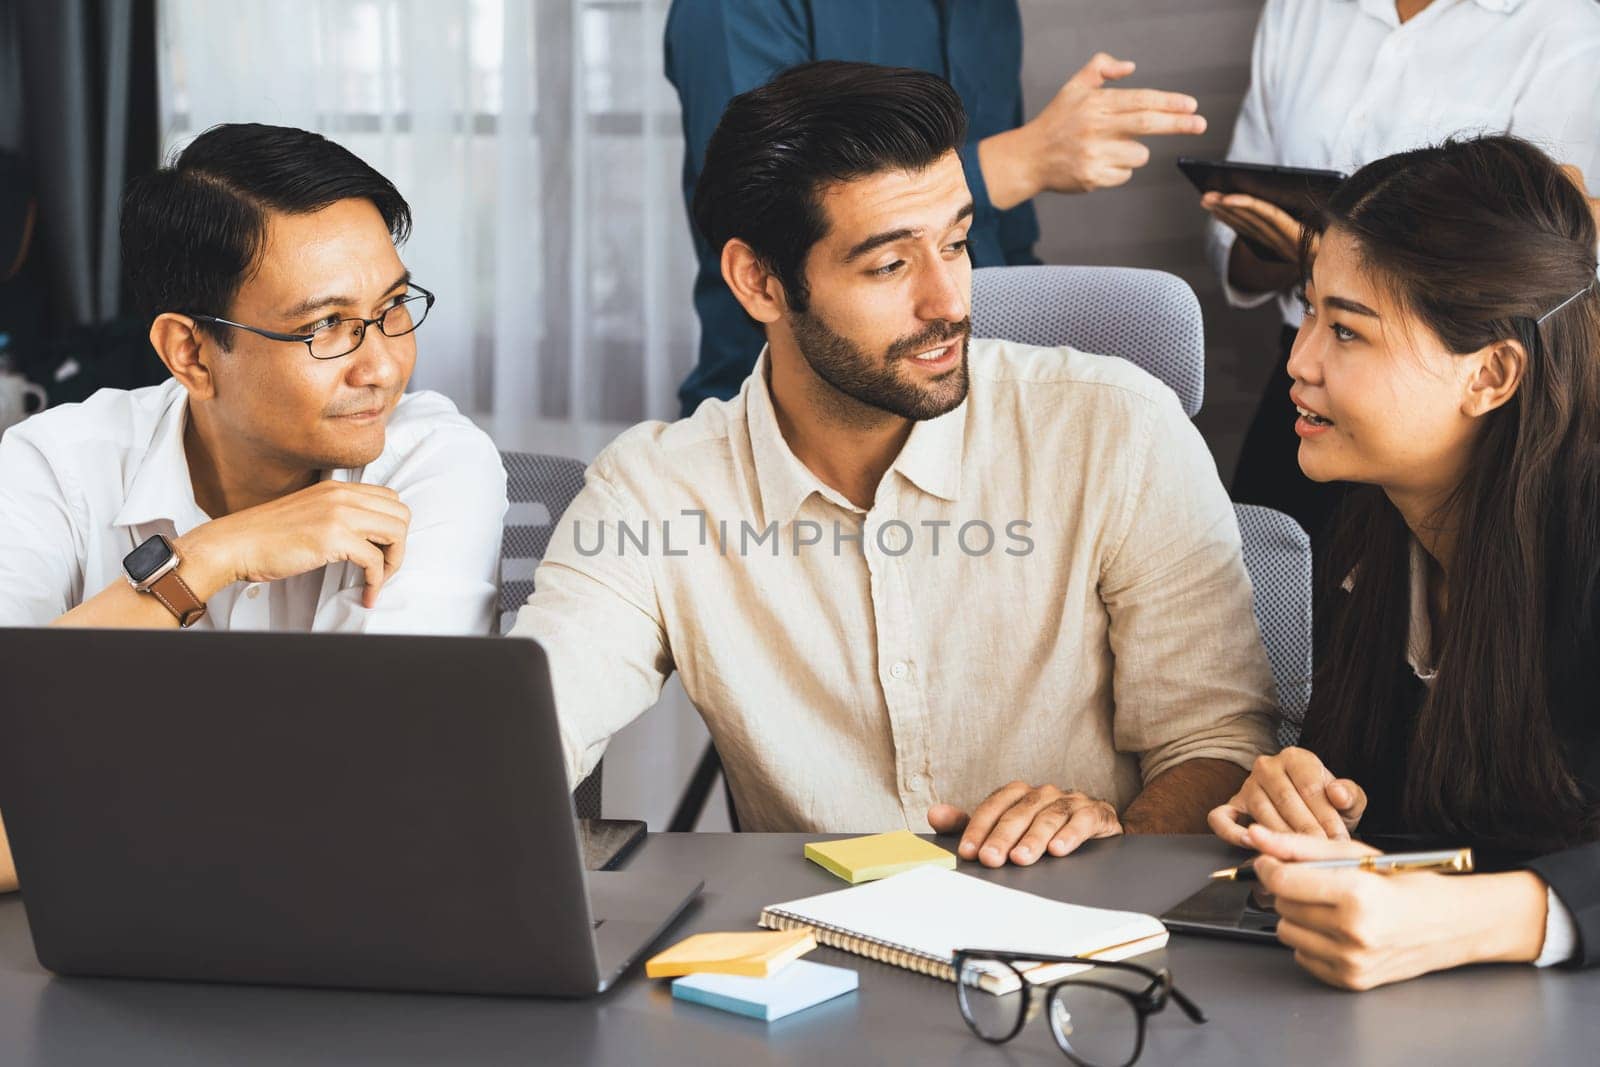 Group of diverse office worker employee working together on strategic business marketing planning in corporate office room. Positive teamwork in business workplace concept. Prudent